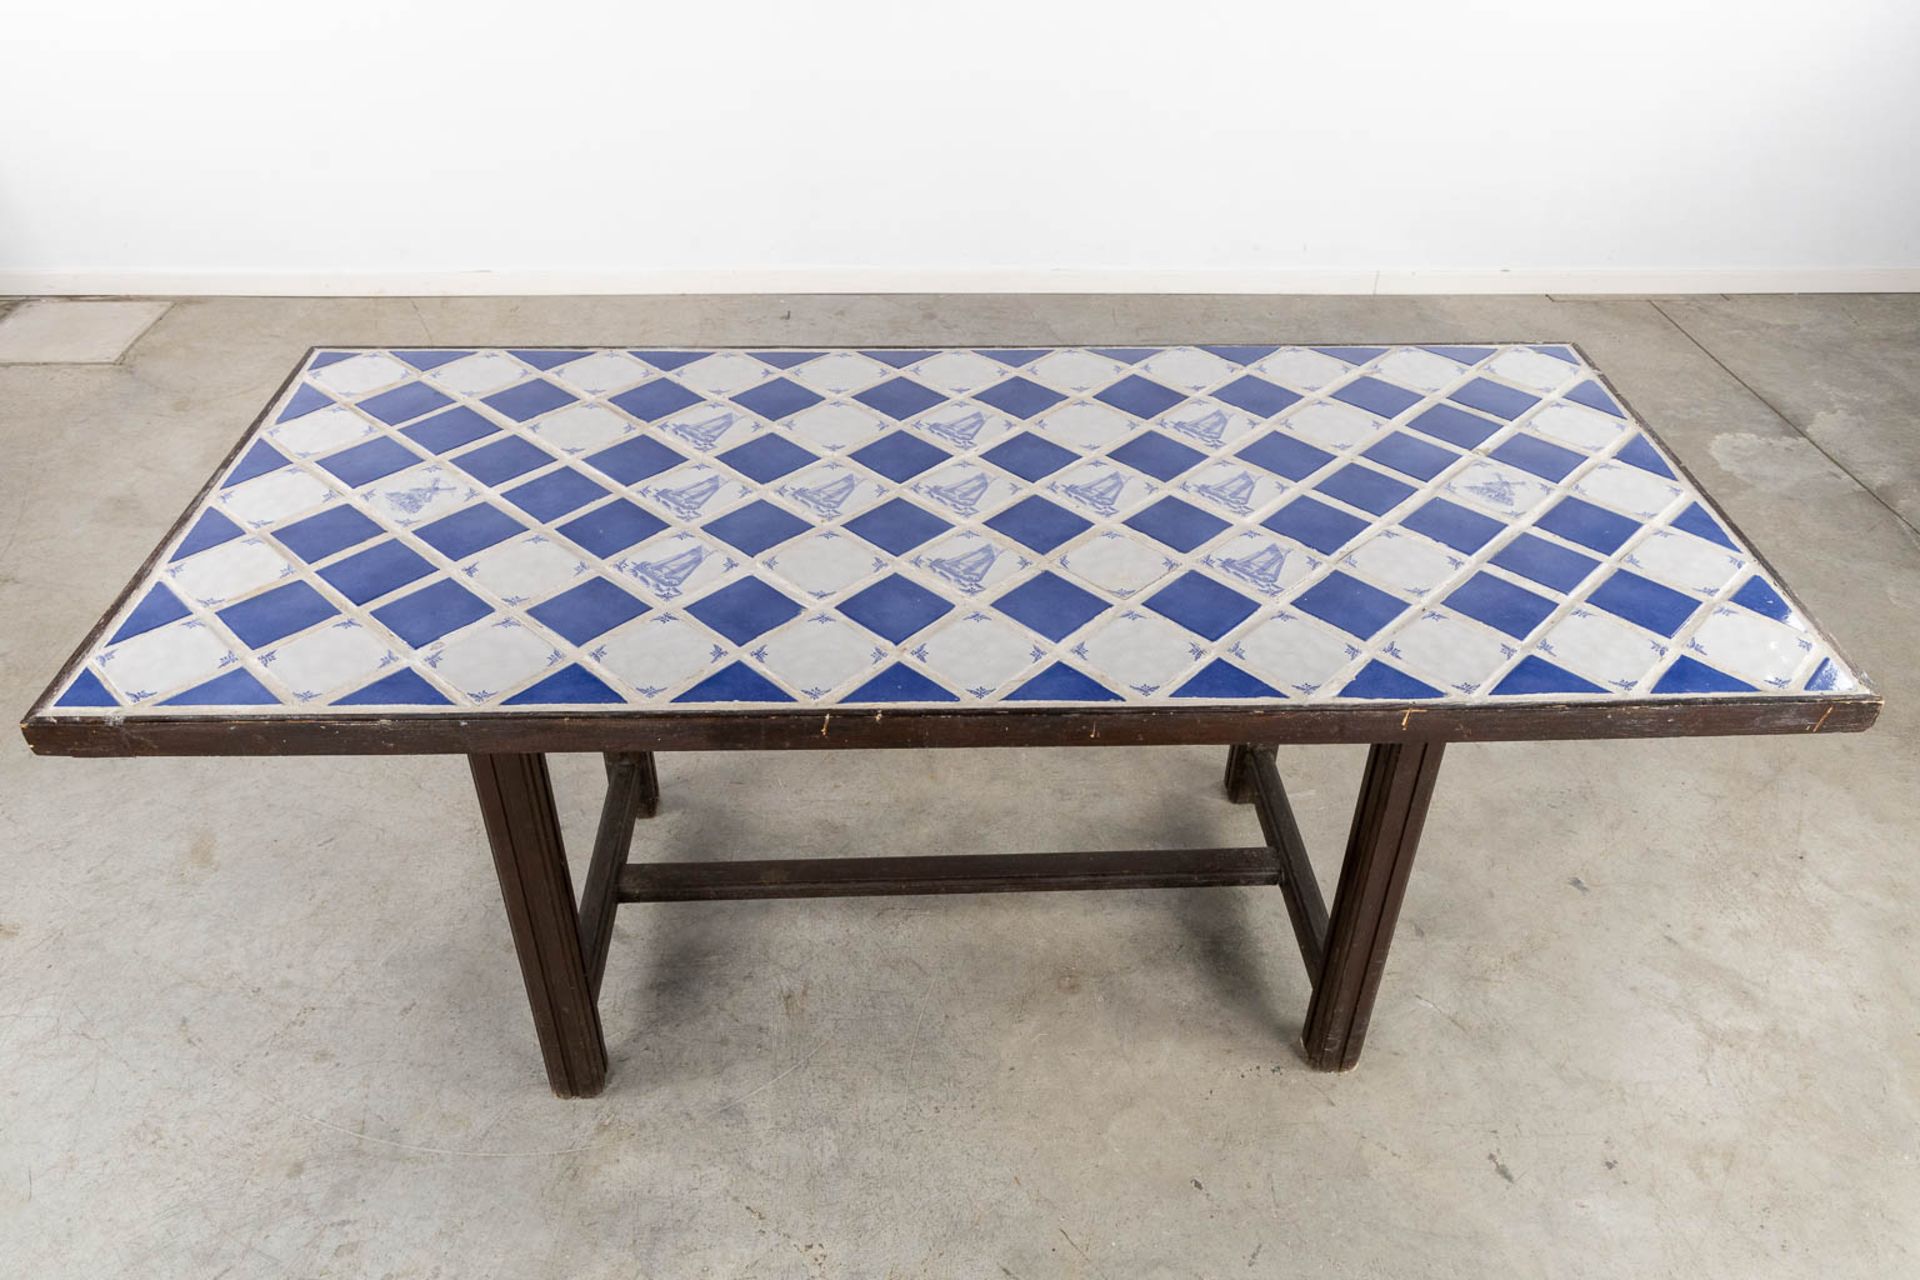 A Spanish table, finished with white and blue tiles. (L:85 x W:184 x H:76 cm) - Bild 7 aus 11